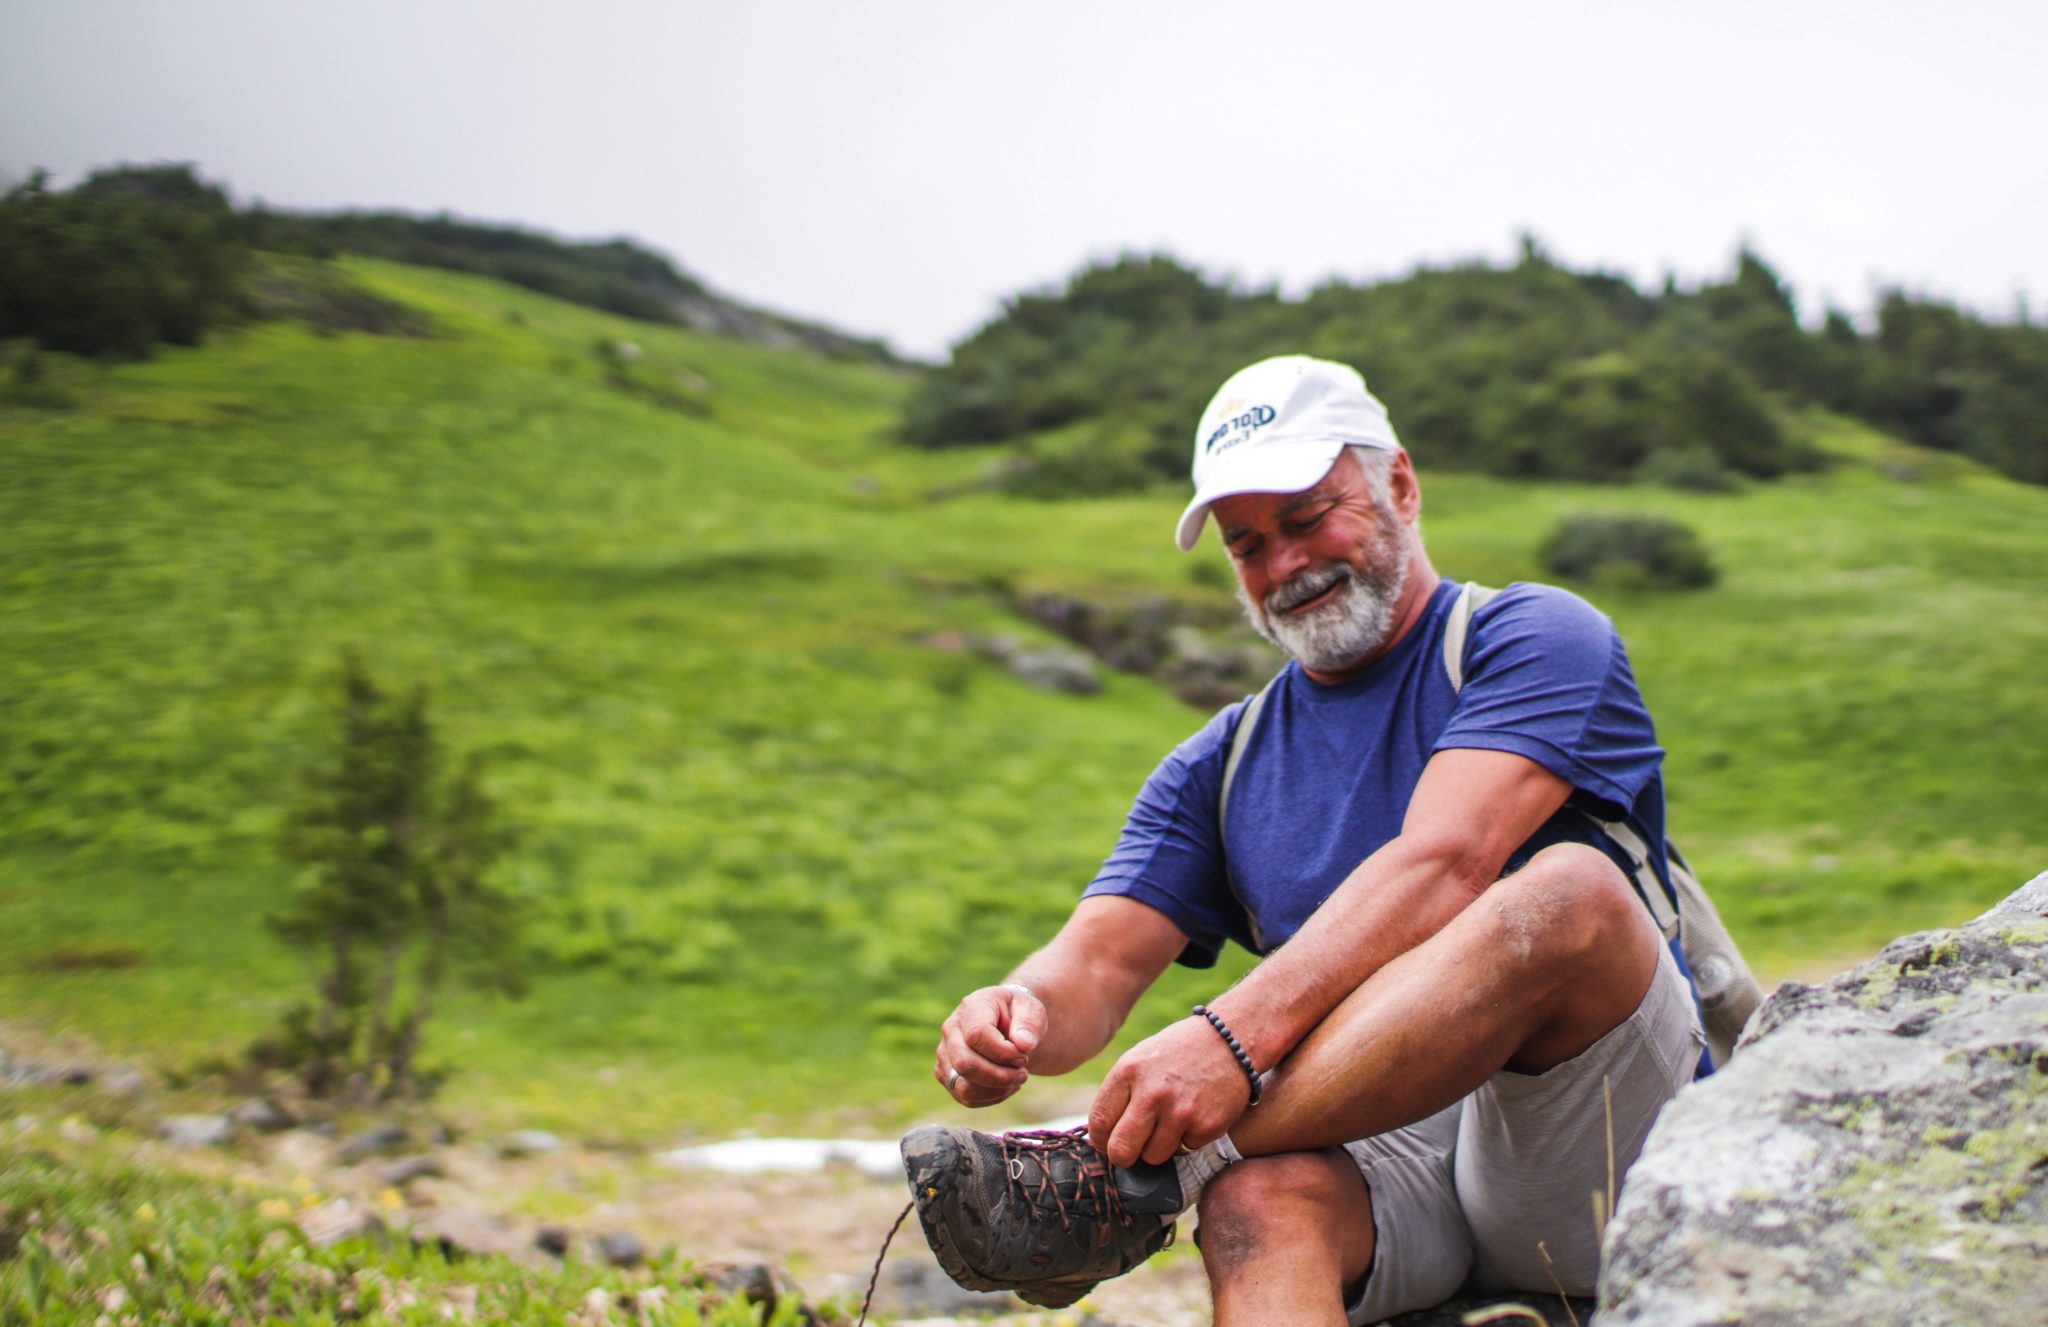 An older man on a hike in the hills, sits to tie his boot lace